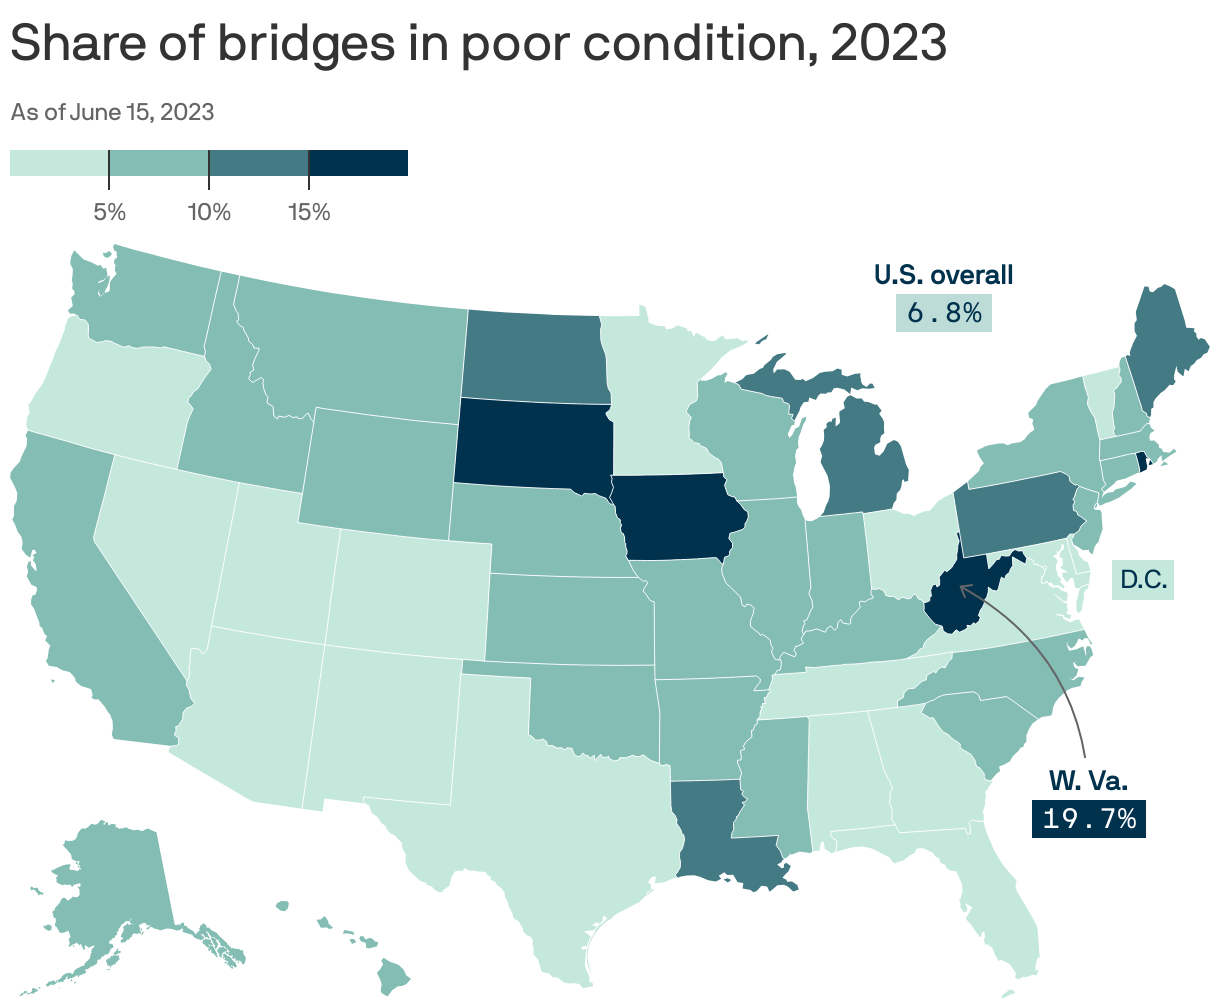 Share of bridges in poor condition, 2023